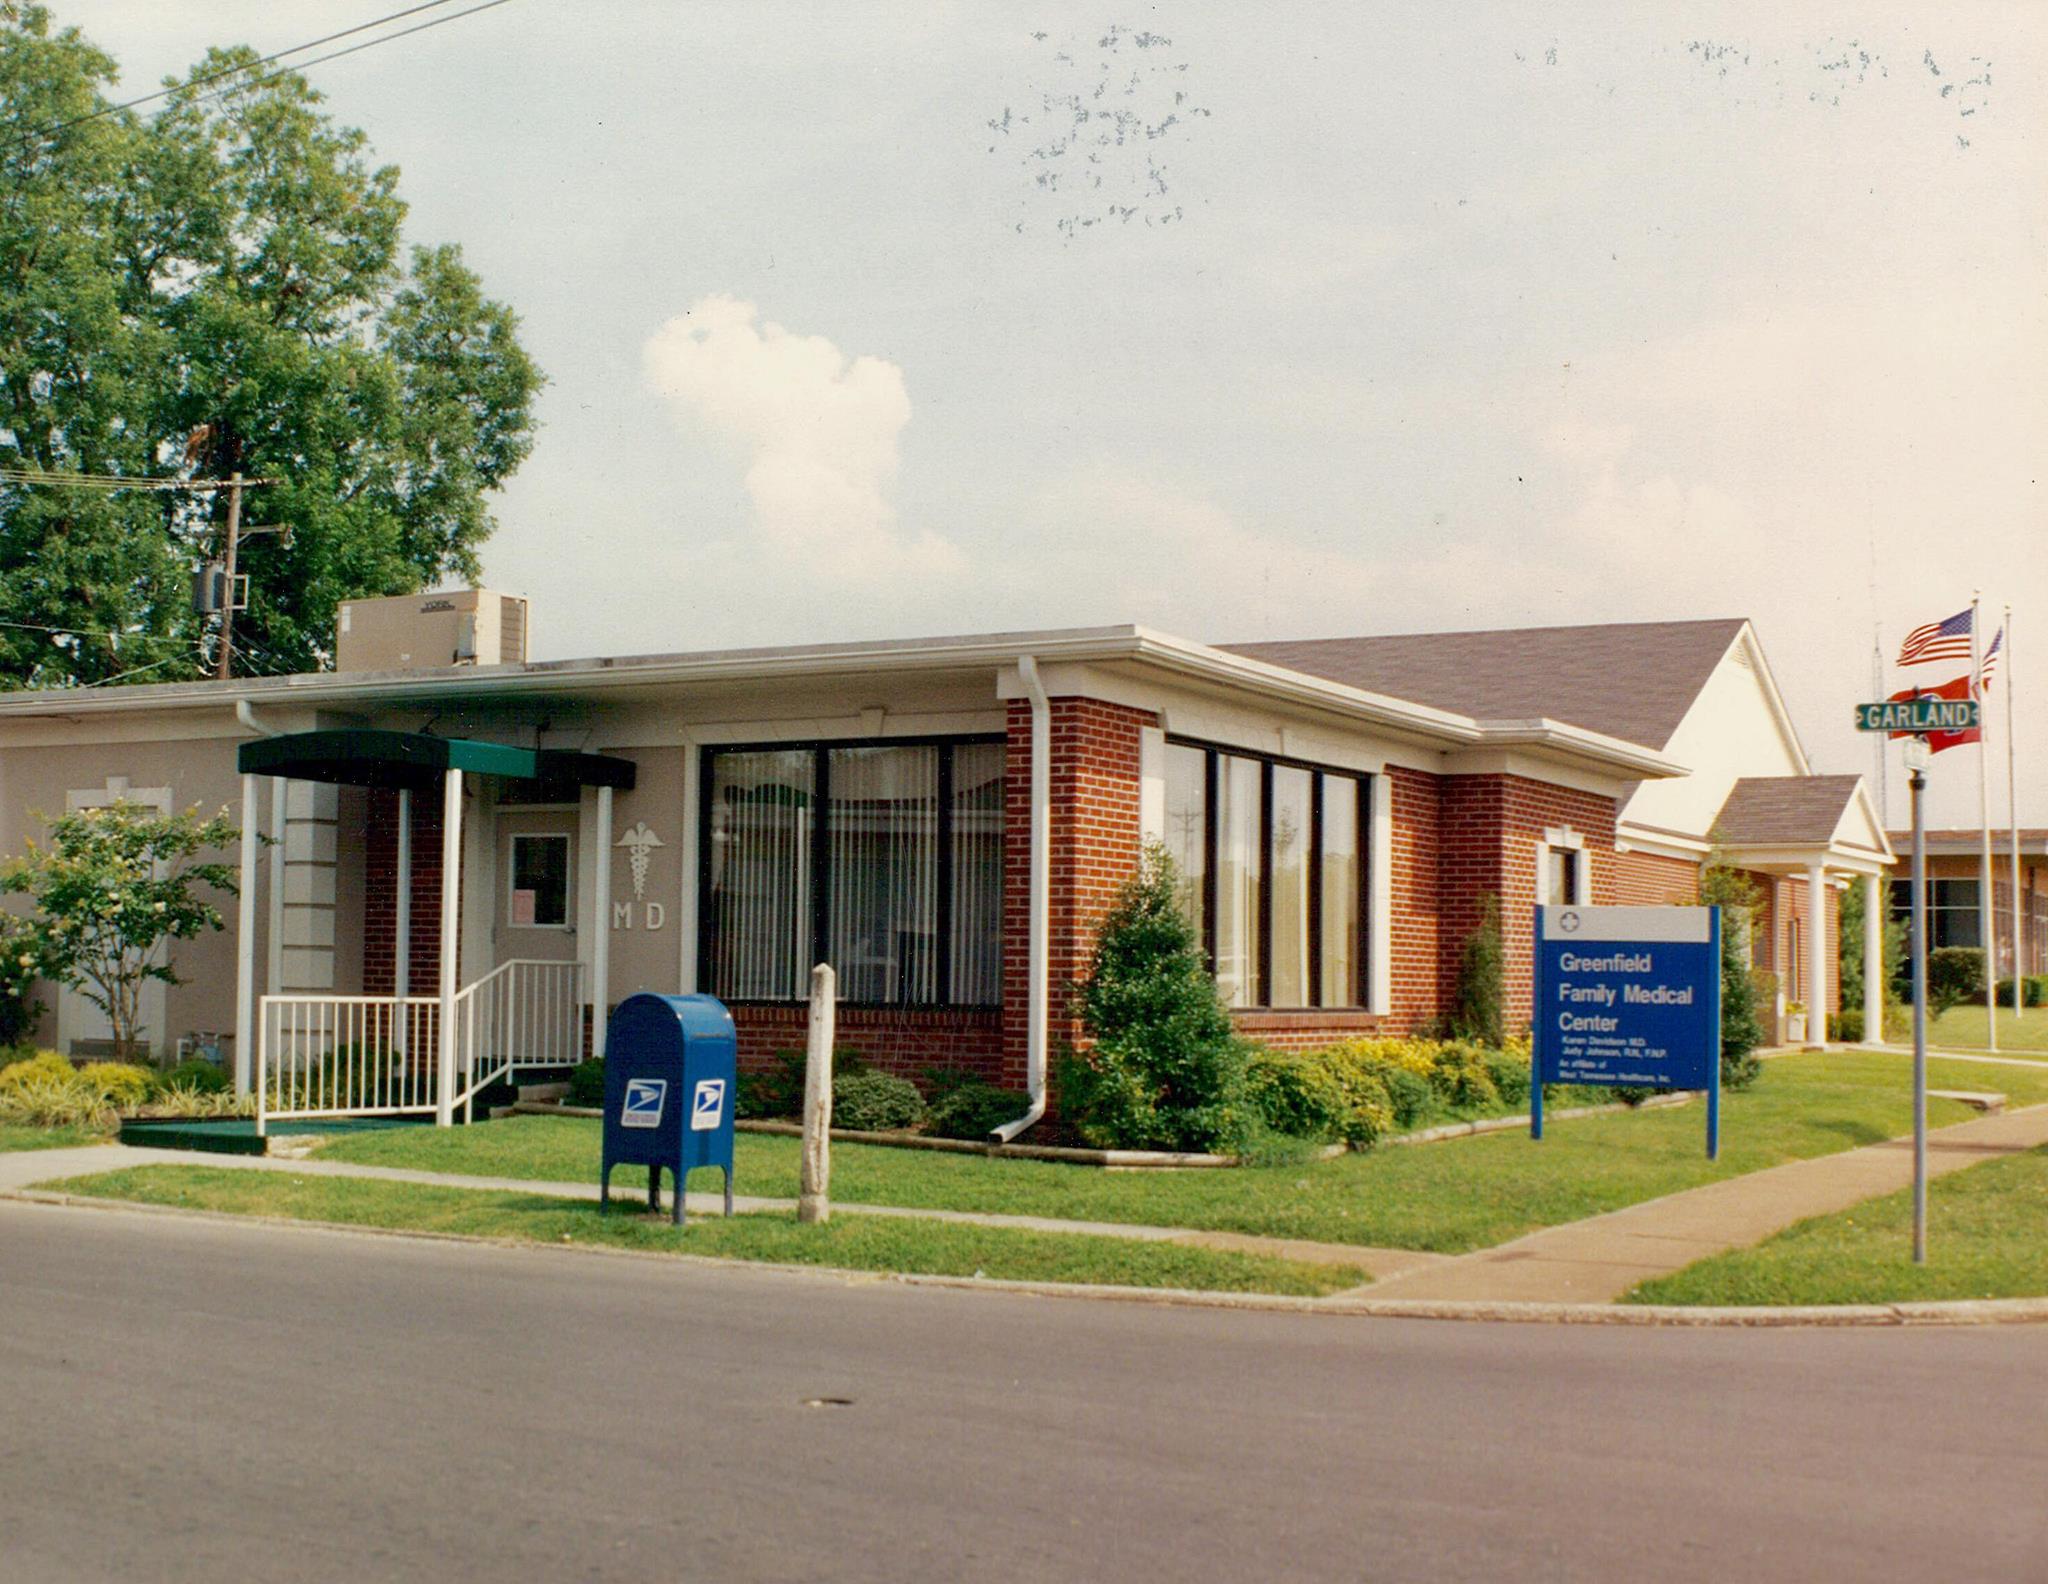 Greenfield Family Medical Center